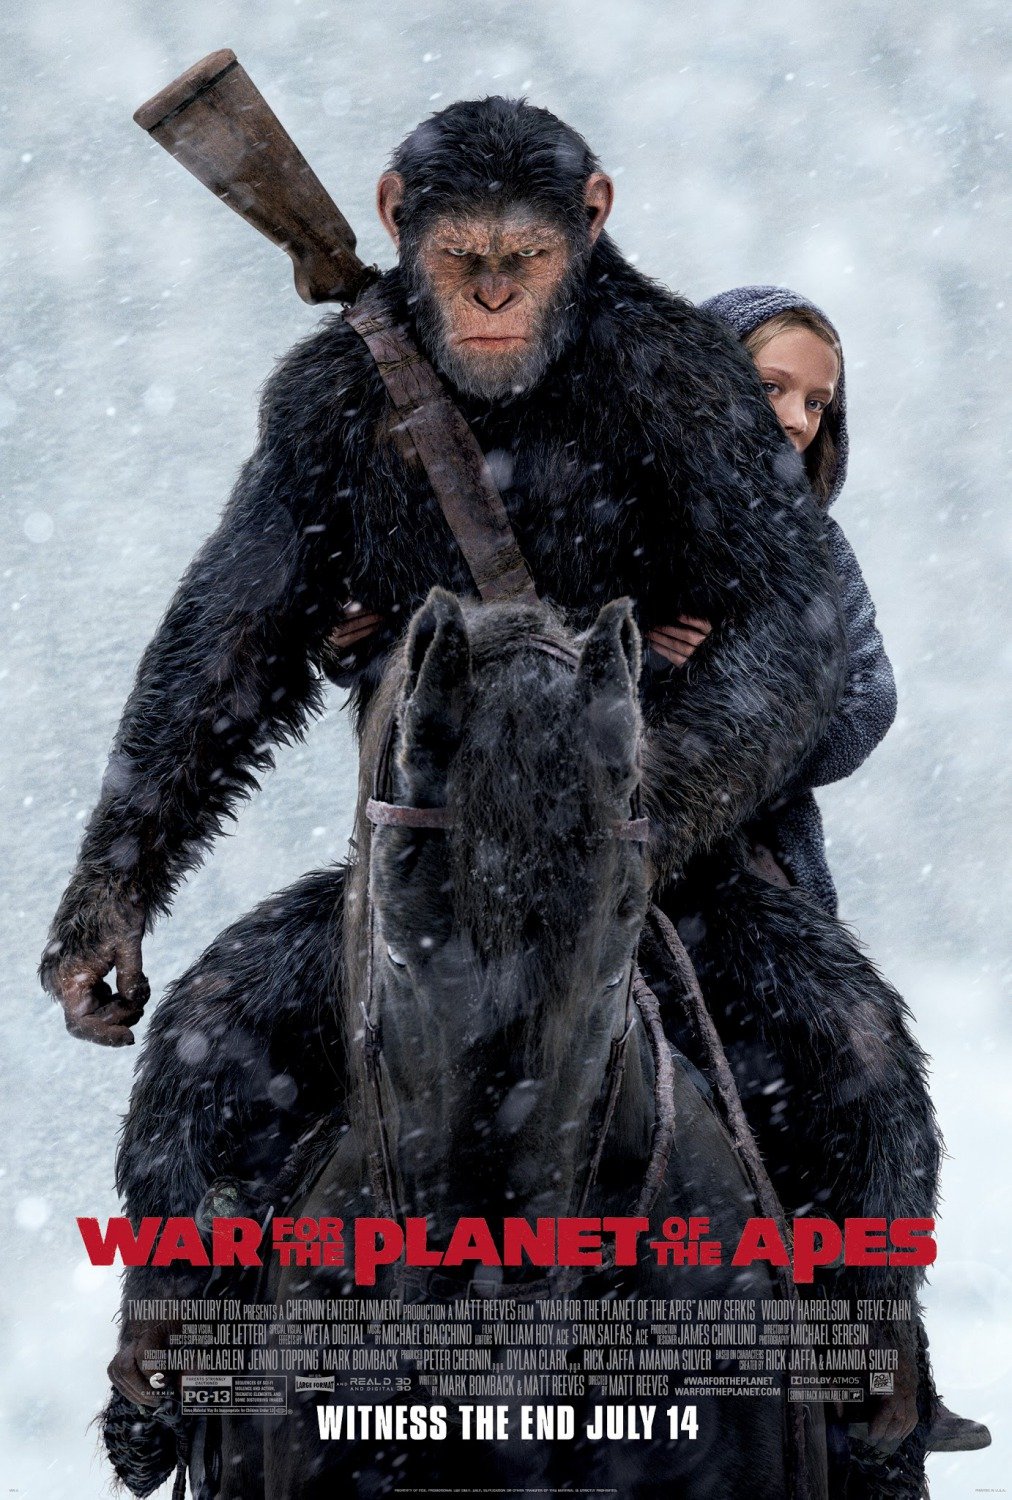 War Of The Planet Of The Apes Free Online War for the Planet of the Apes Hd 1080p Latino (2017) | Cine Online